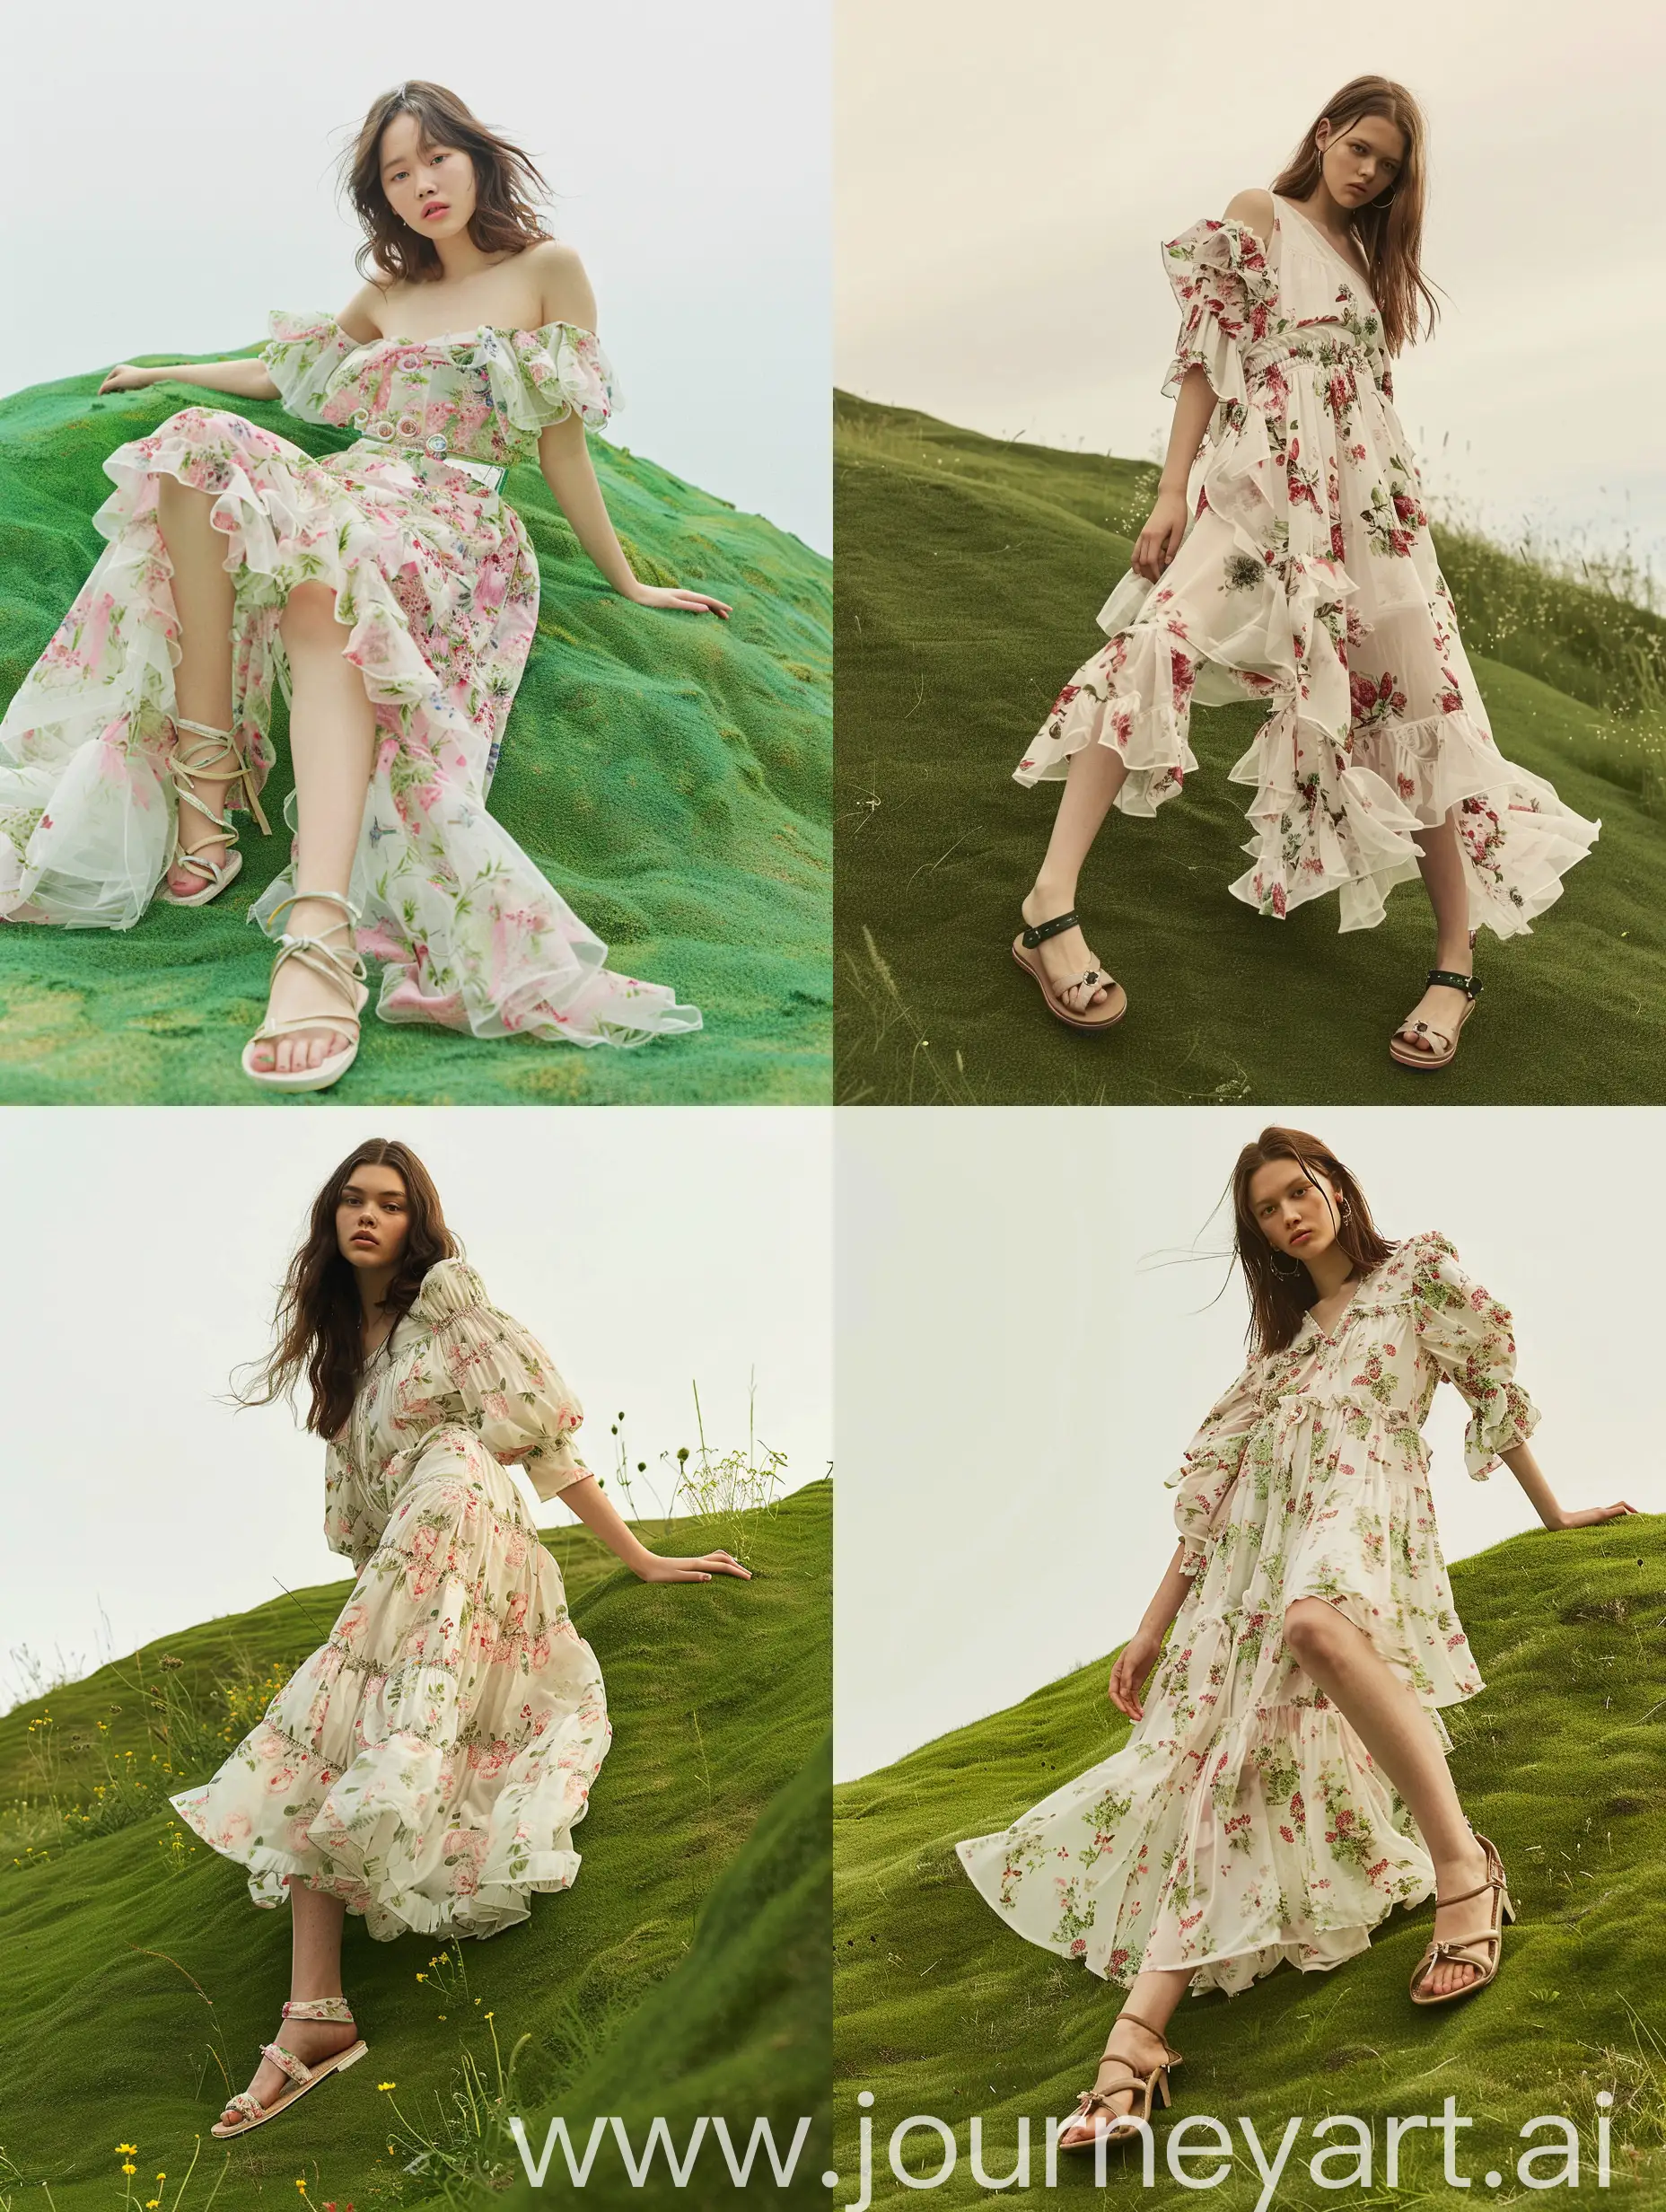 full-body shot,woman posing on a green hill while wearing a floral dress and sandals, in the style of light white and pink, 32k uhd, digital print, cabincore, jean fautrier, luxurious fabrics, romantic scenery